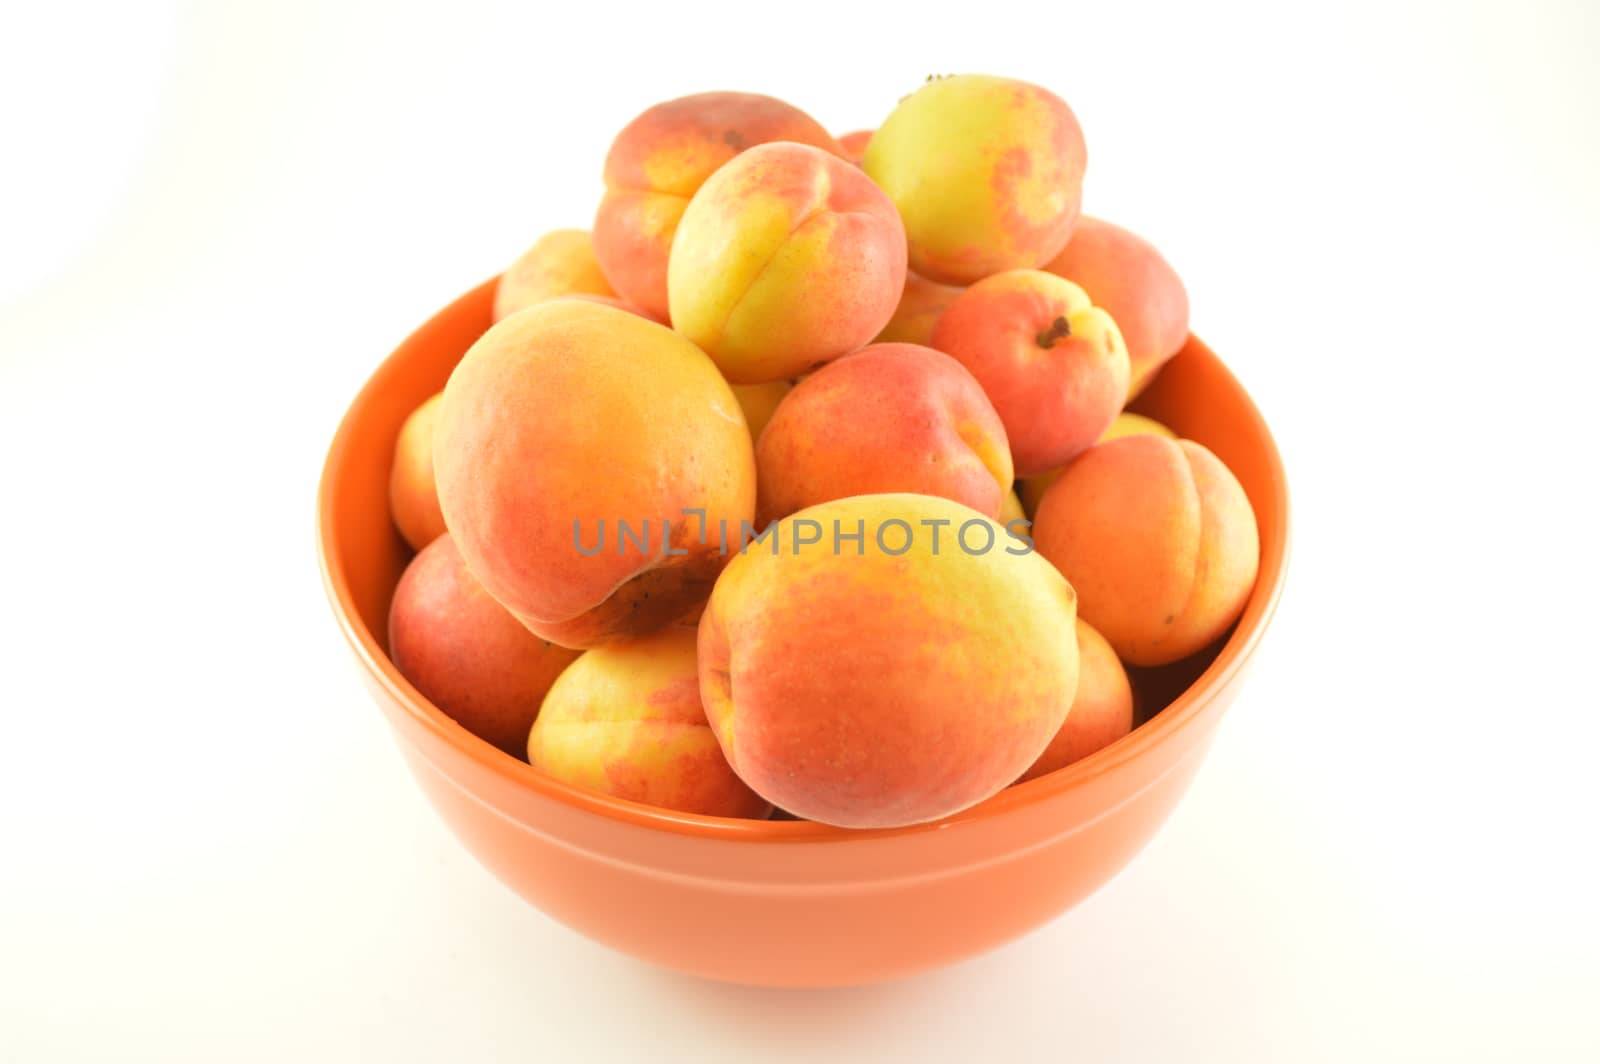 A still life of a bowl full of ripe peaches